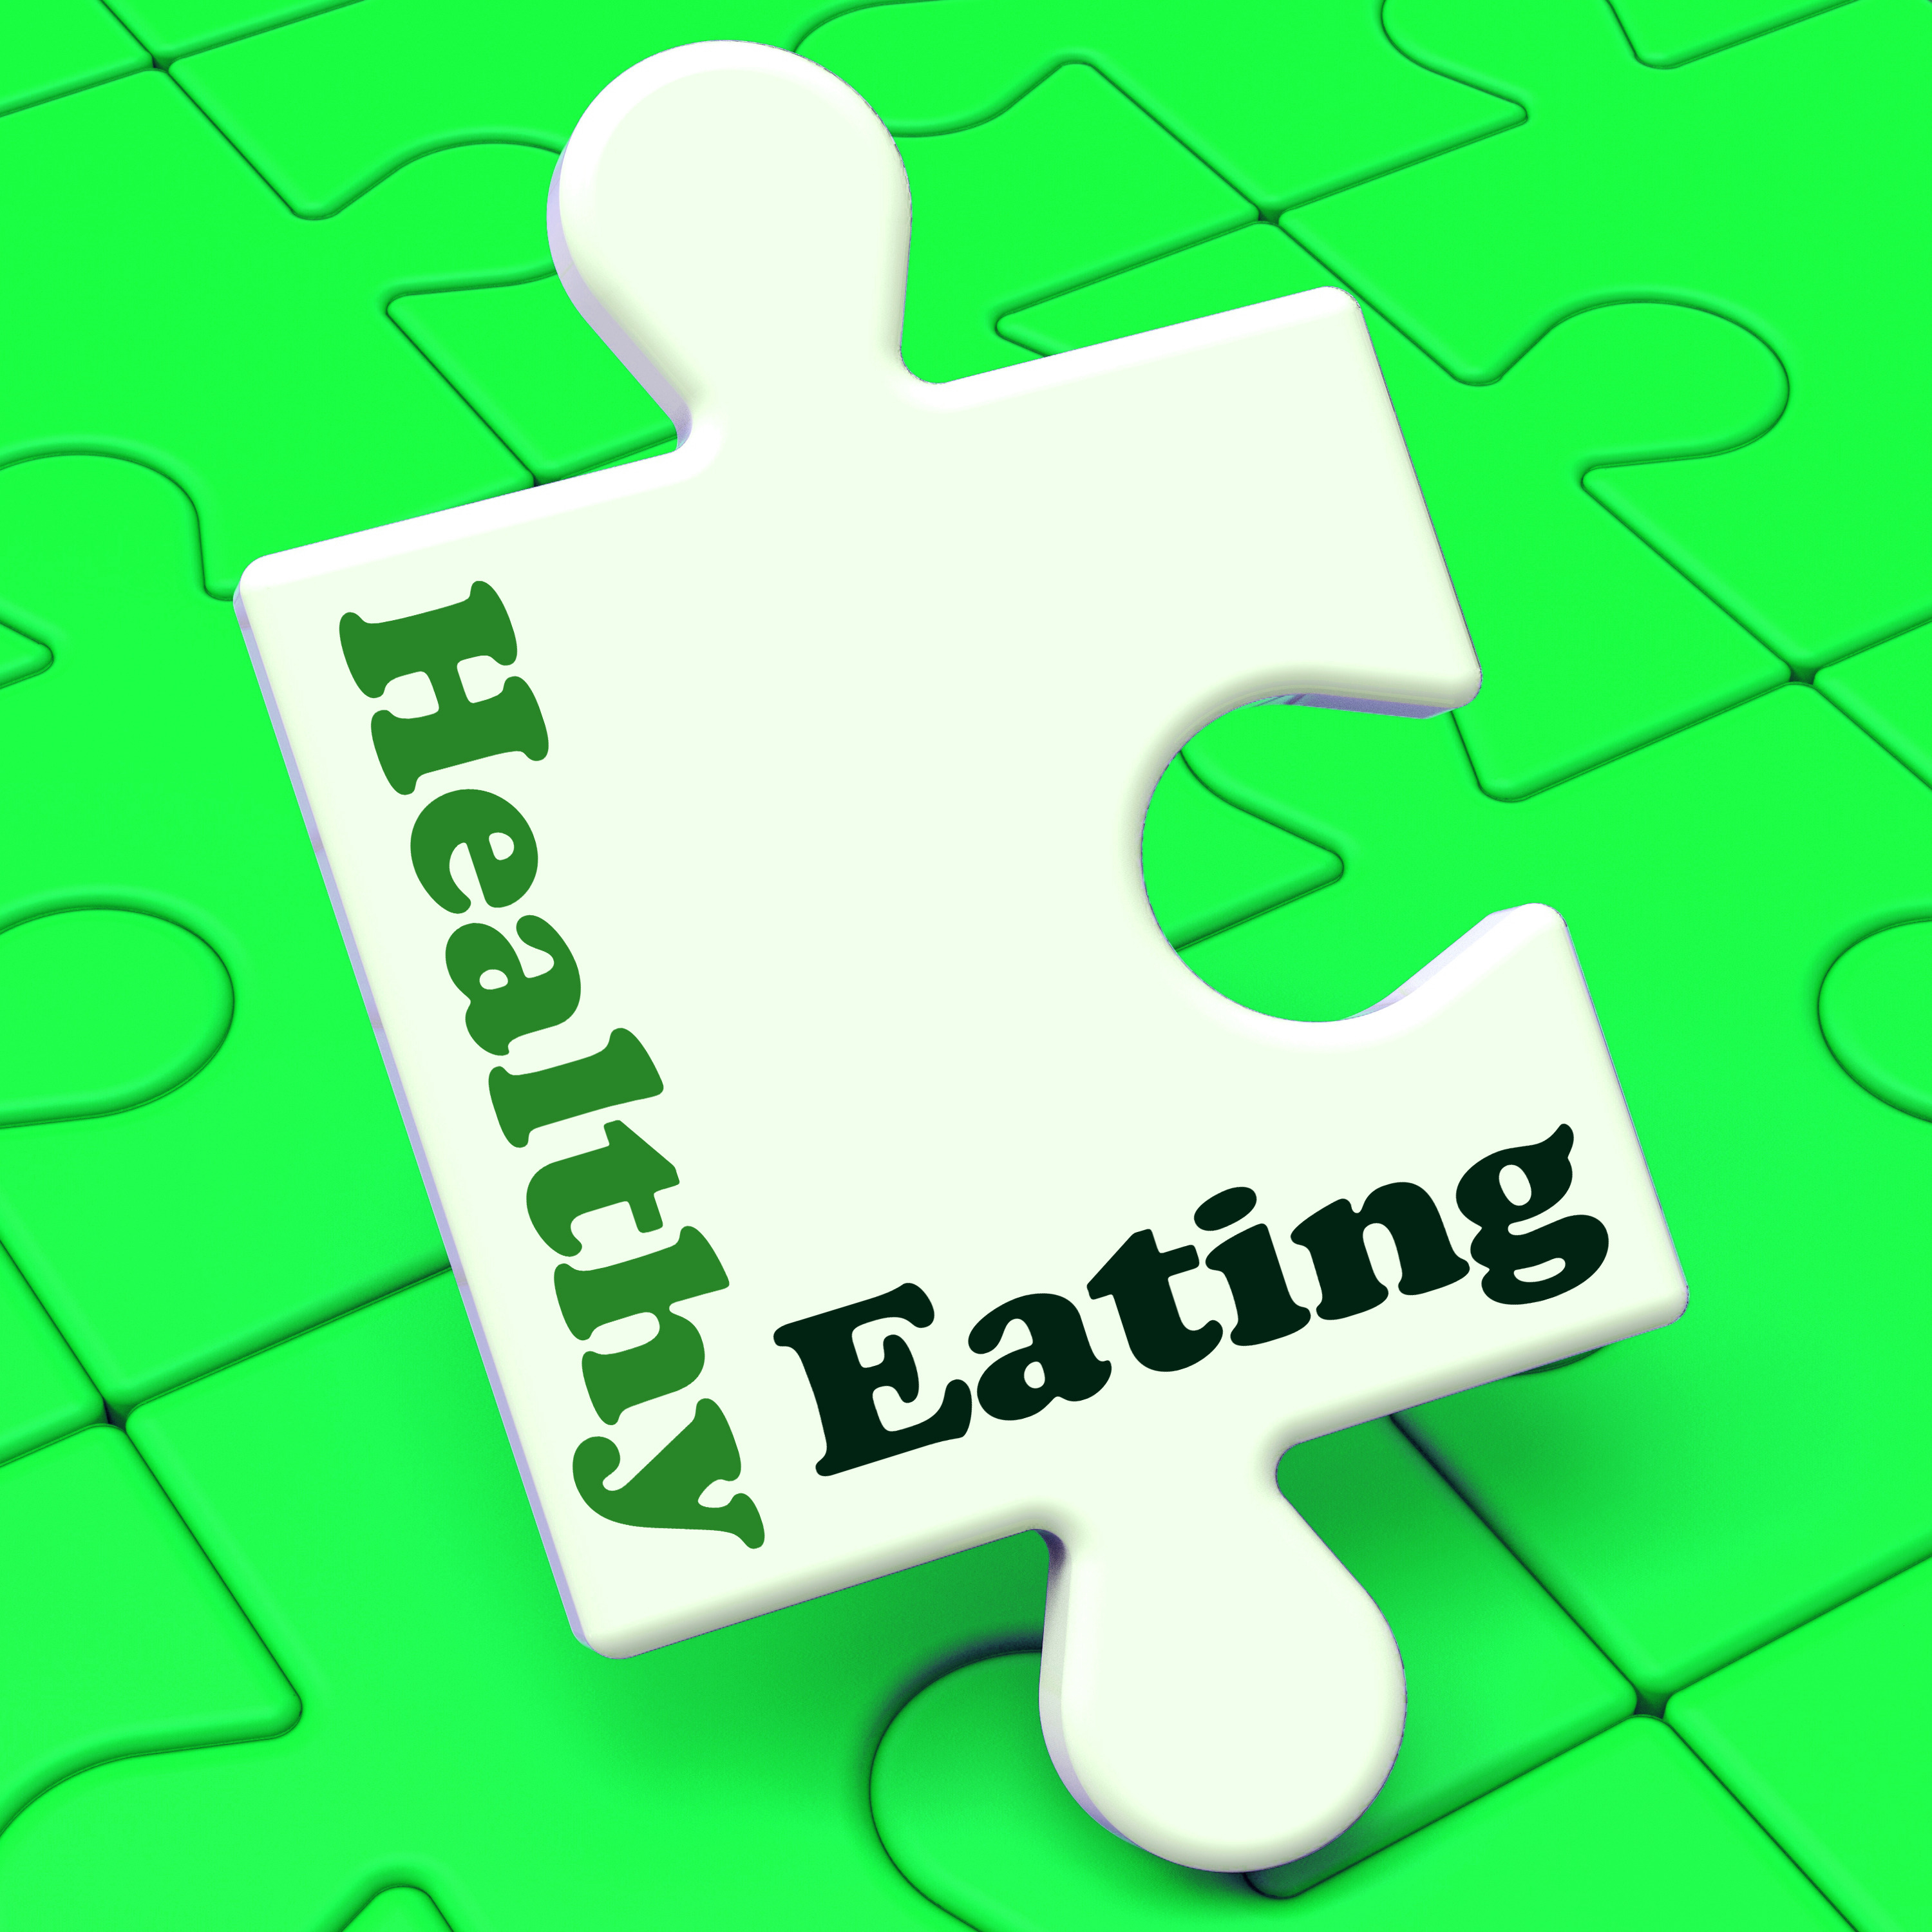 Healthy Eating Meaning Fresh, Nutritious And Low Fat Eating